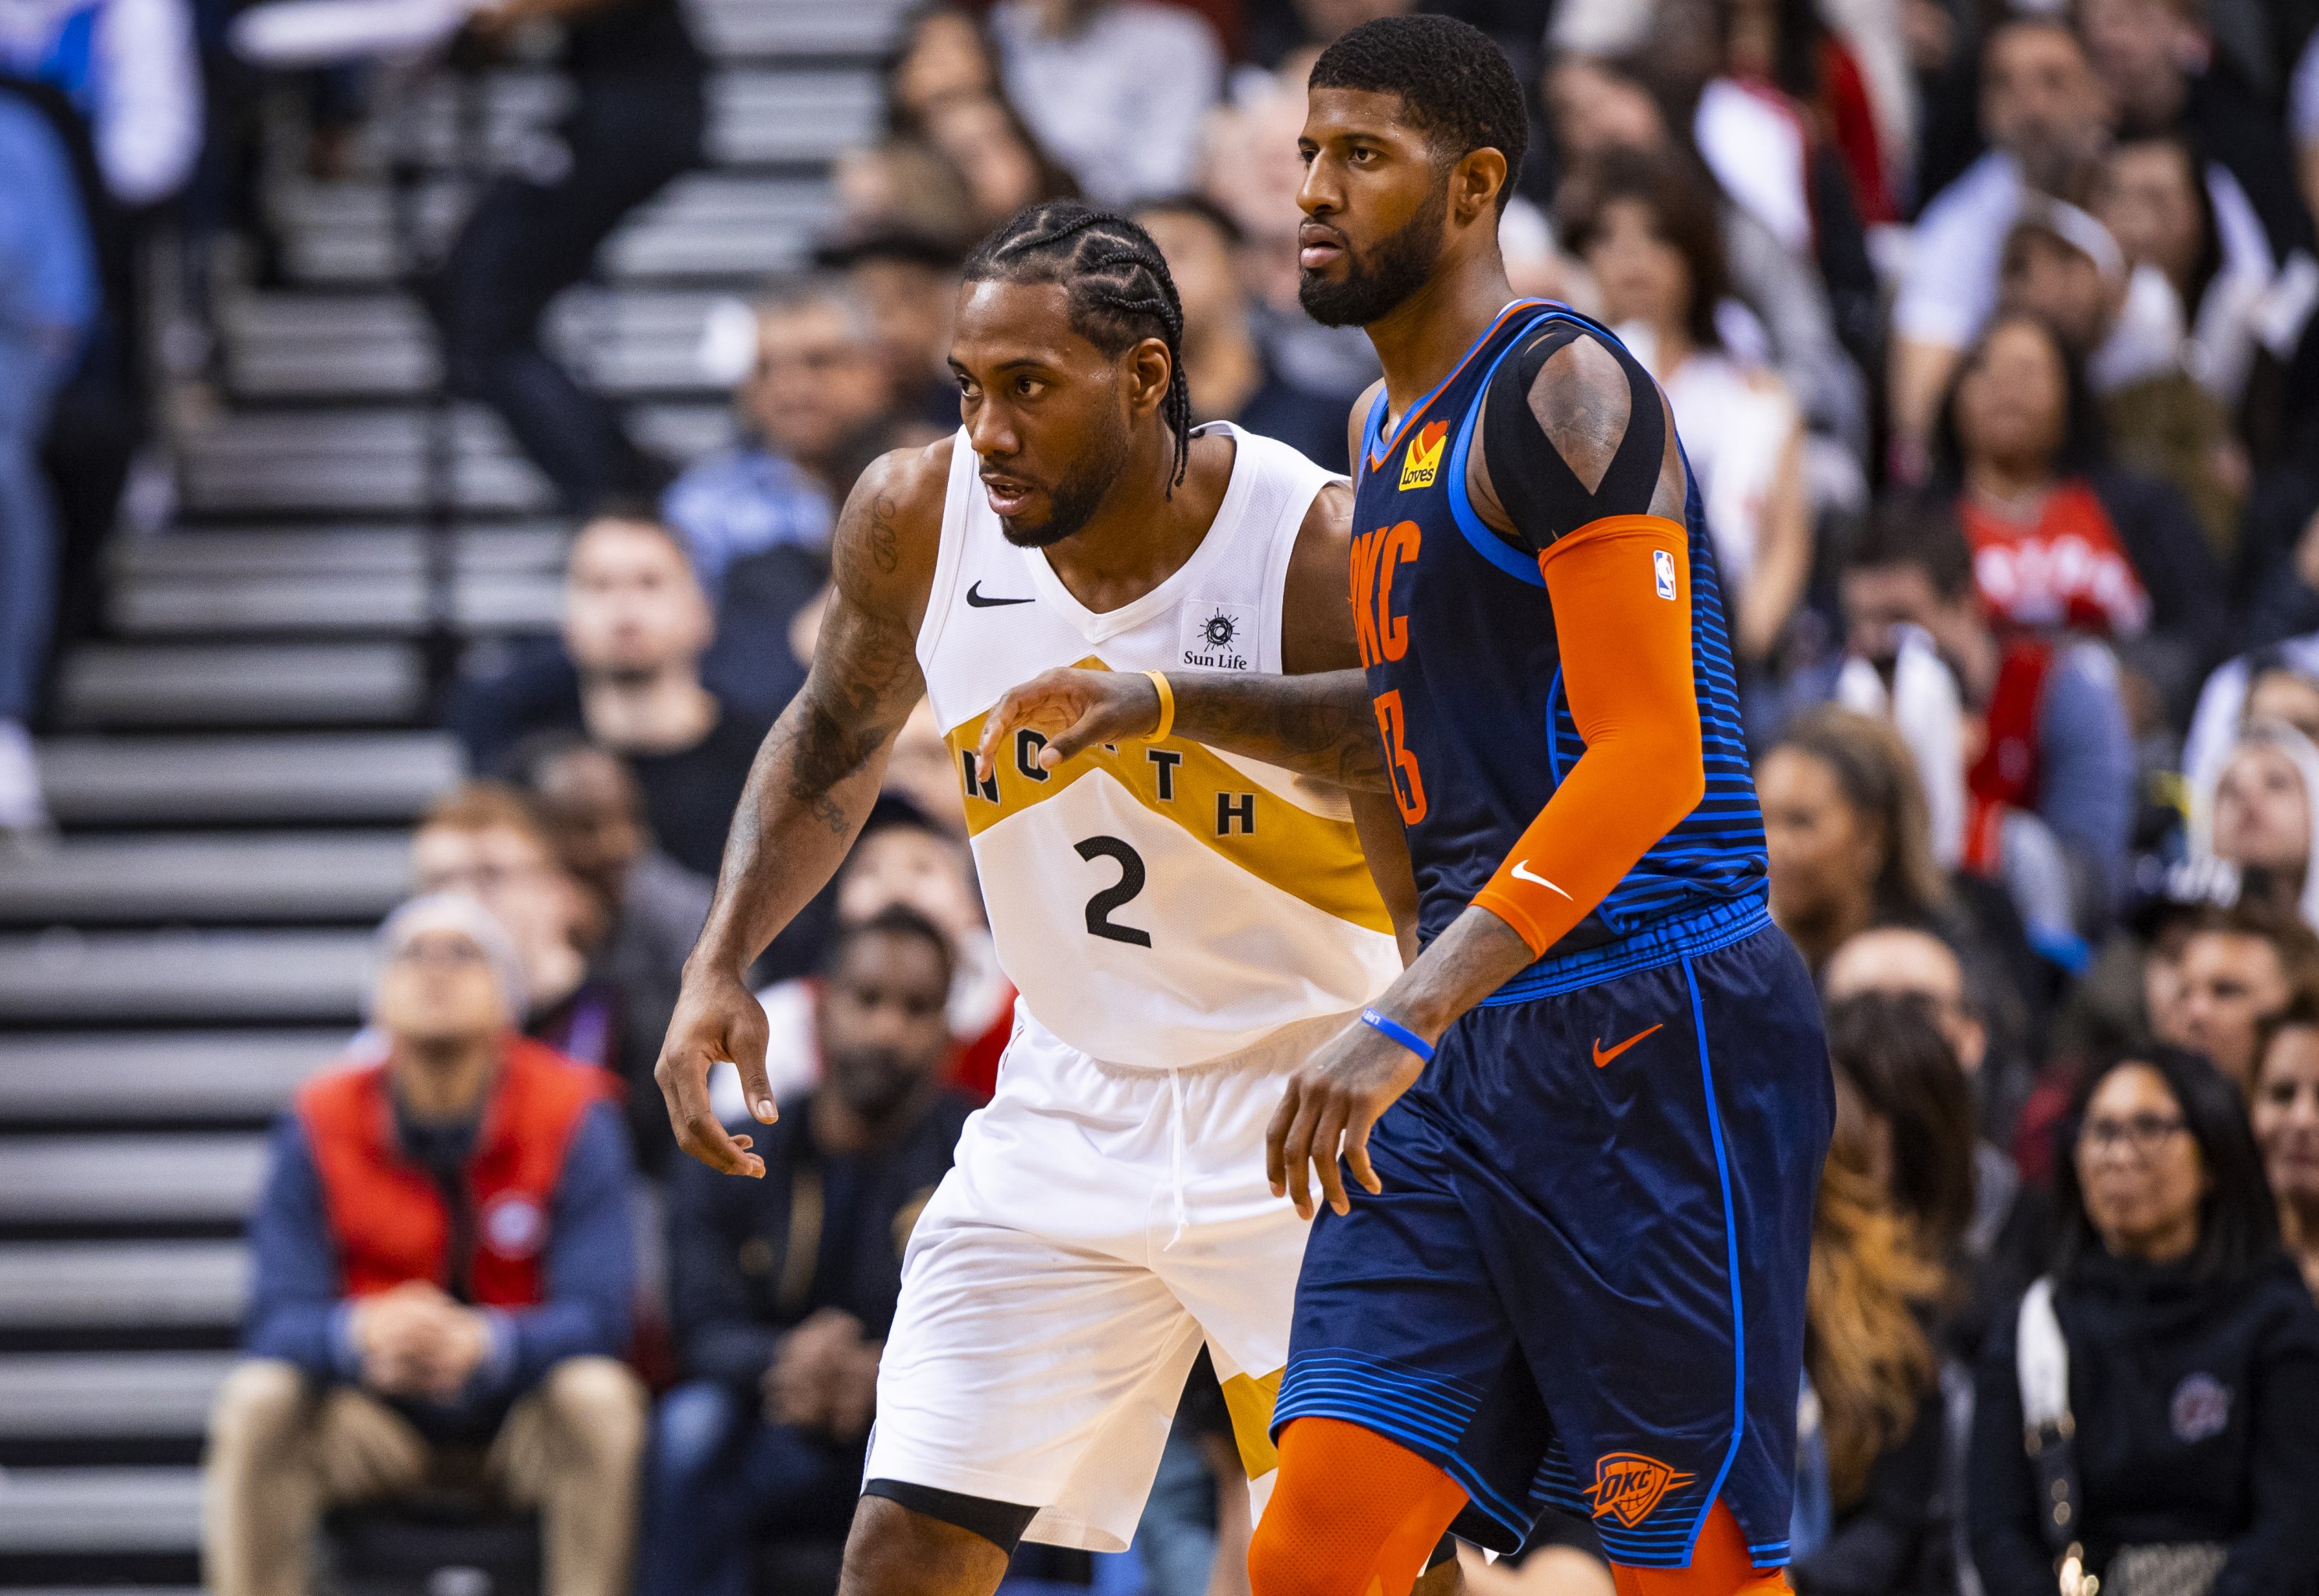 Kawhi Leonard and Paul George show potential in win over Houston